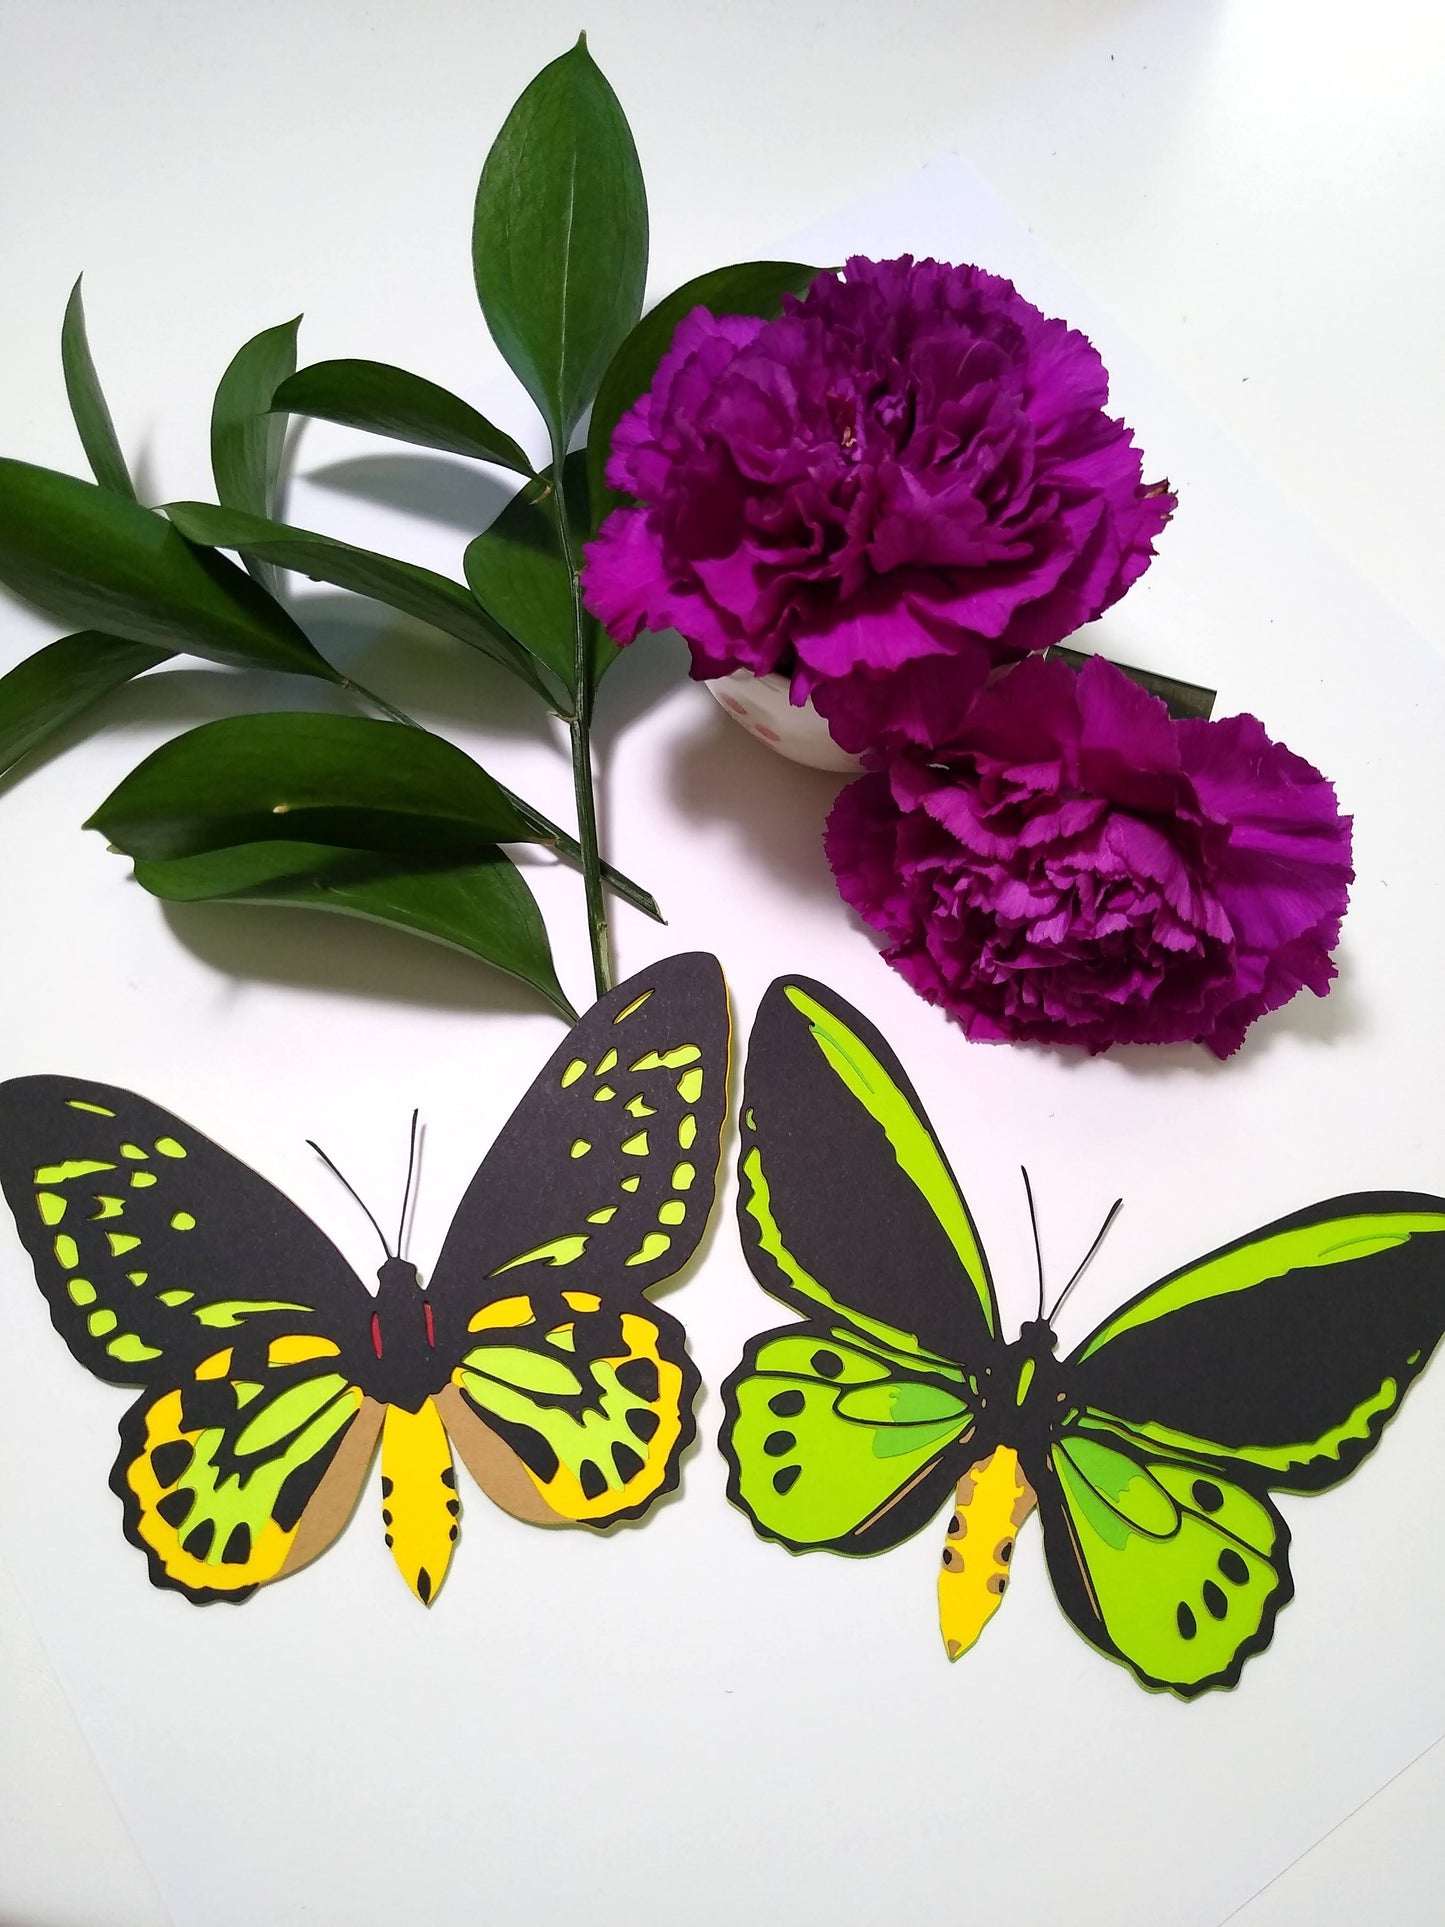 Two multi-layered paper butterflies rest on a table. They are in the design of the front and back of a Cairns Birdwing butterfly. They rest below sprigs of leaves and two purple flowers.